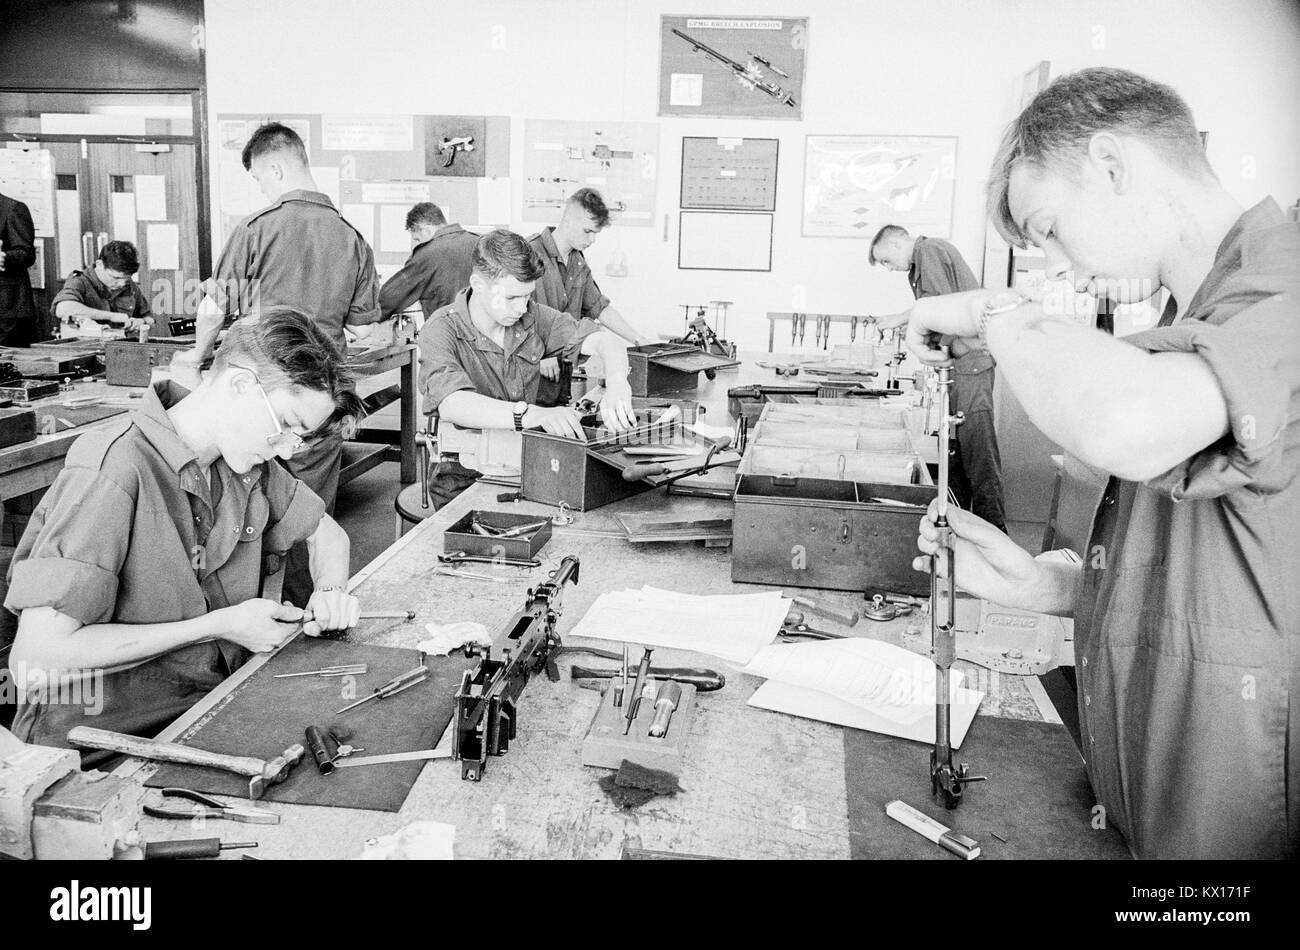 British army squaddies undergoing basic training in a workshop armoury for weapons maintainance training, England, 15th June 1993 Stock Photo